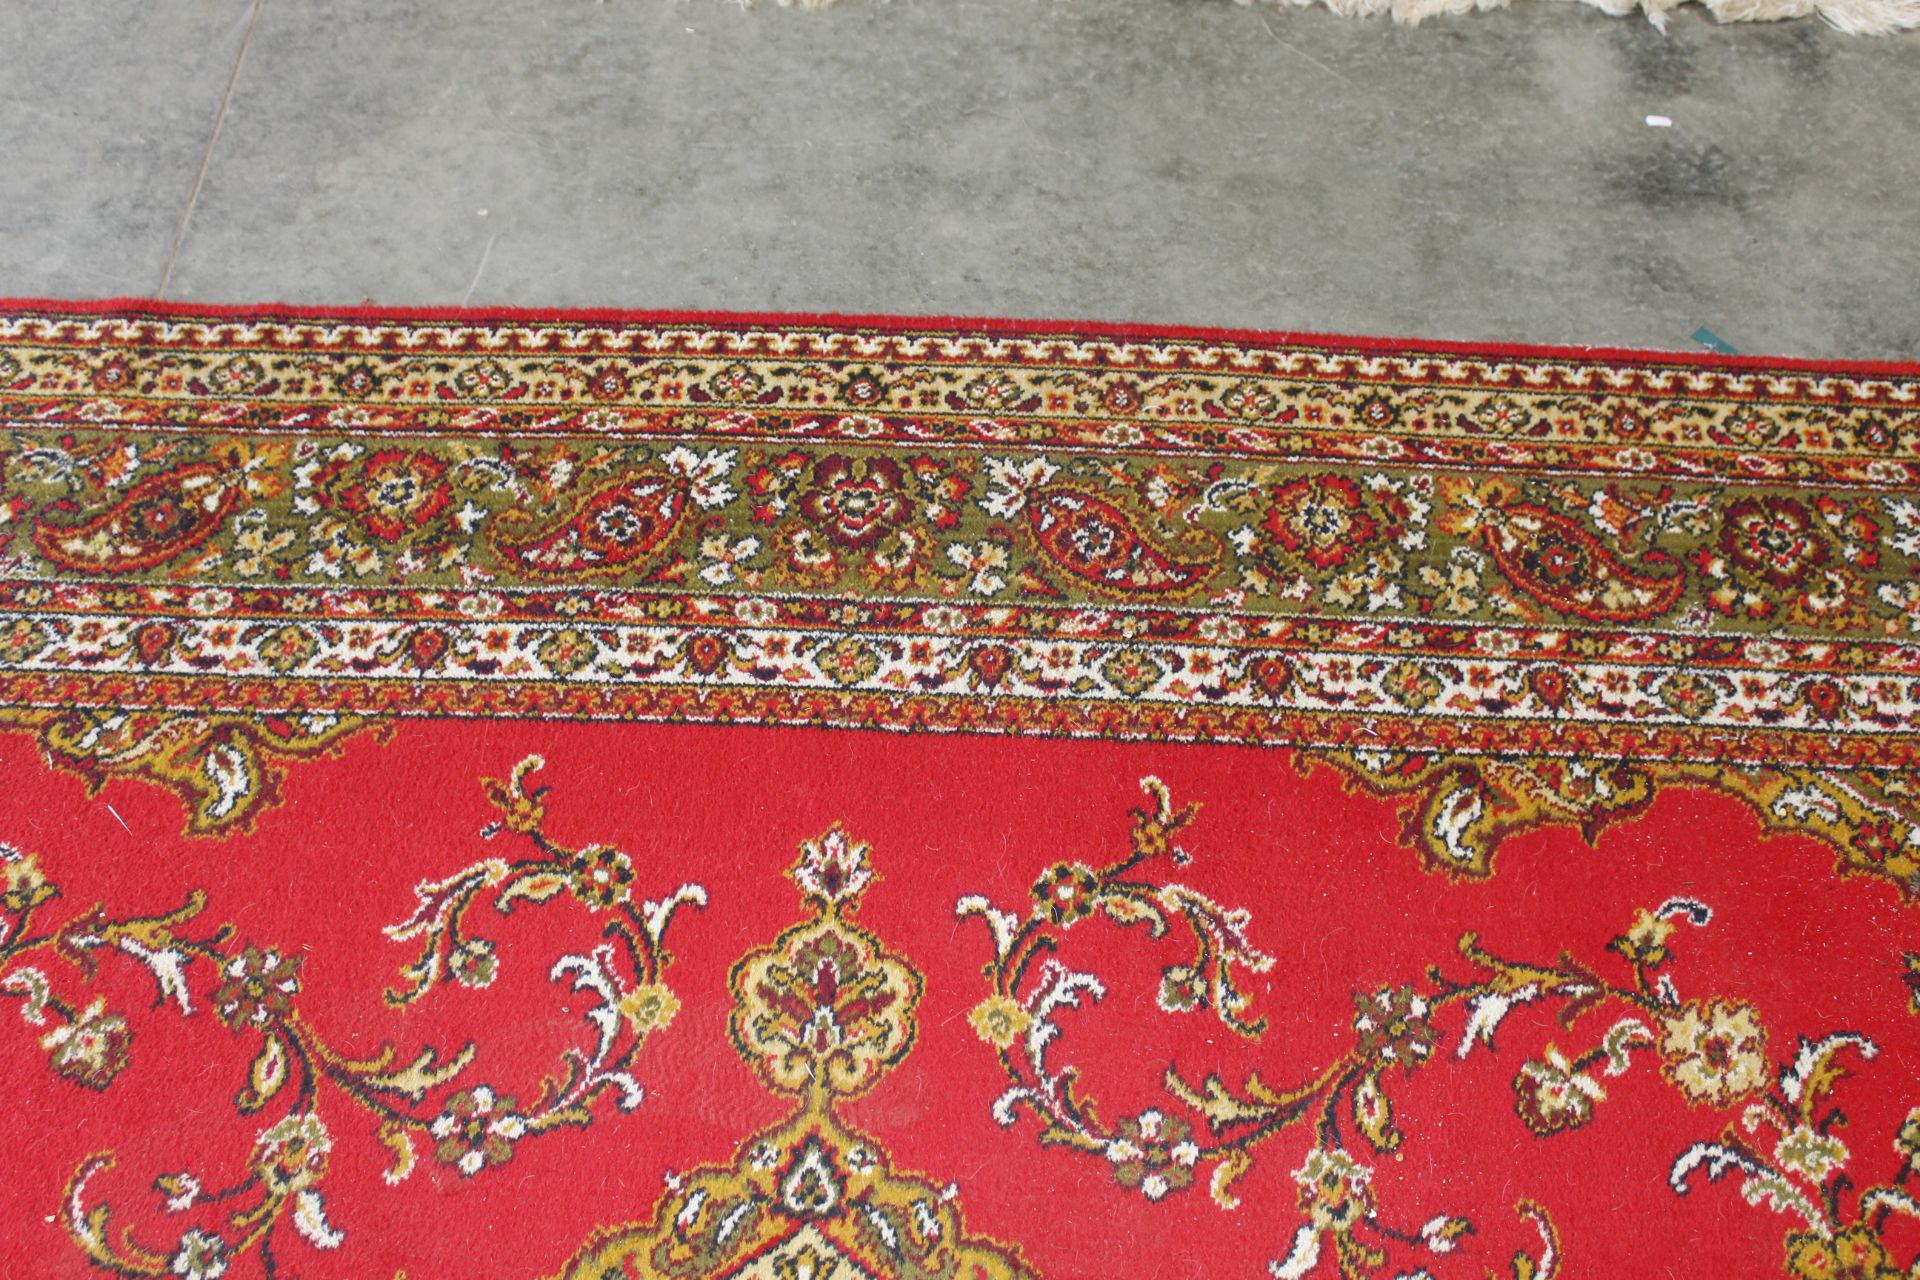 An approx. 12' x 9' red patterned rug AF - Image 10 of 11